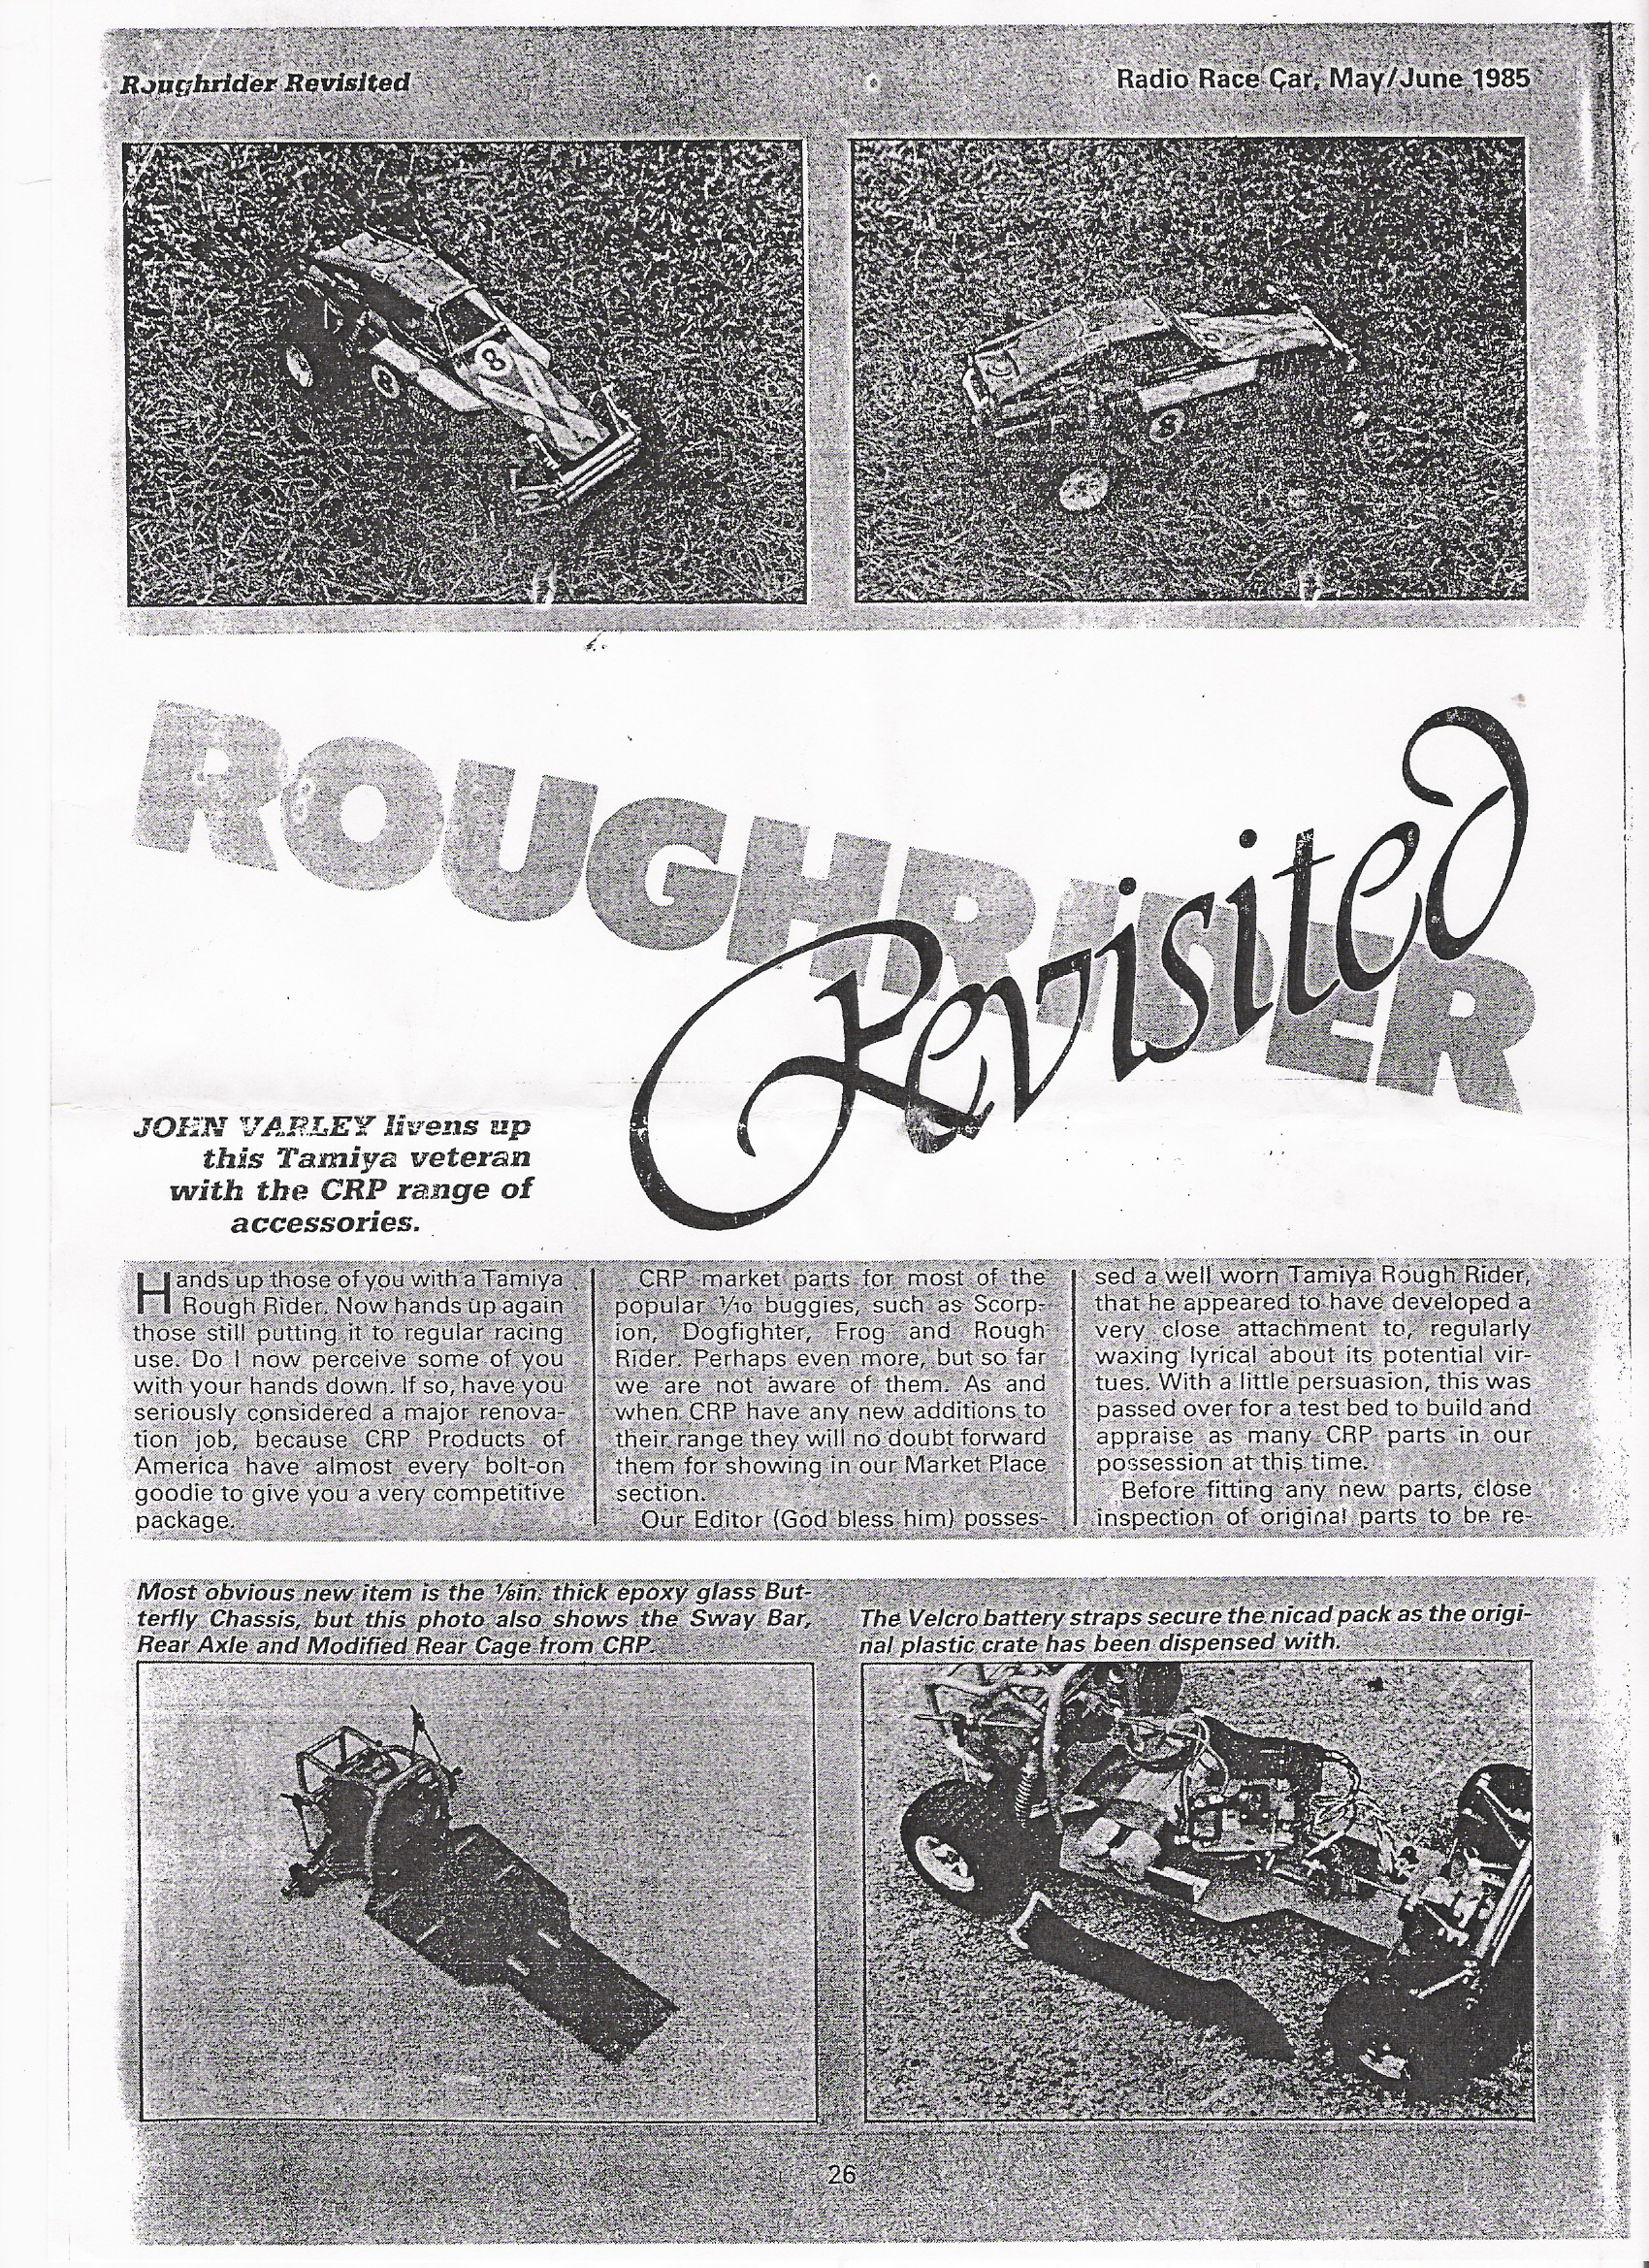 Radio Race Car's May/June 1985 'Rough Rider Revisited' article